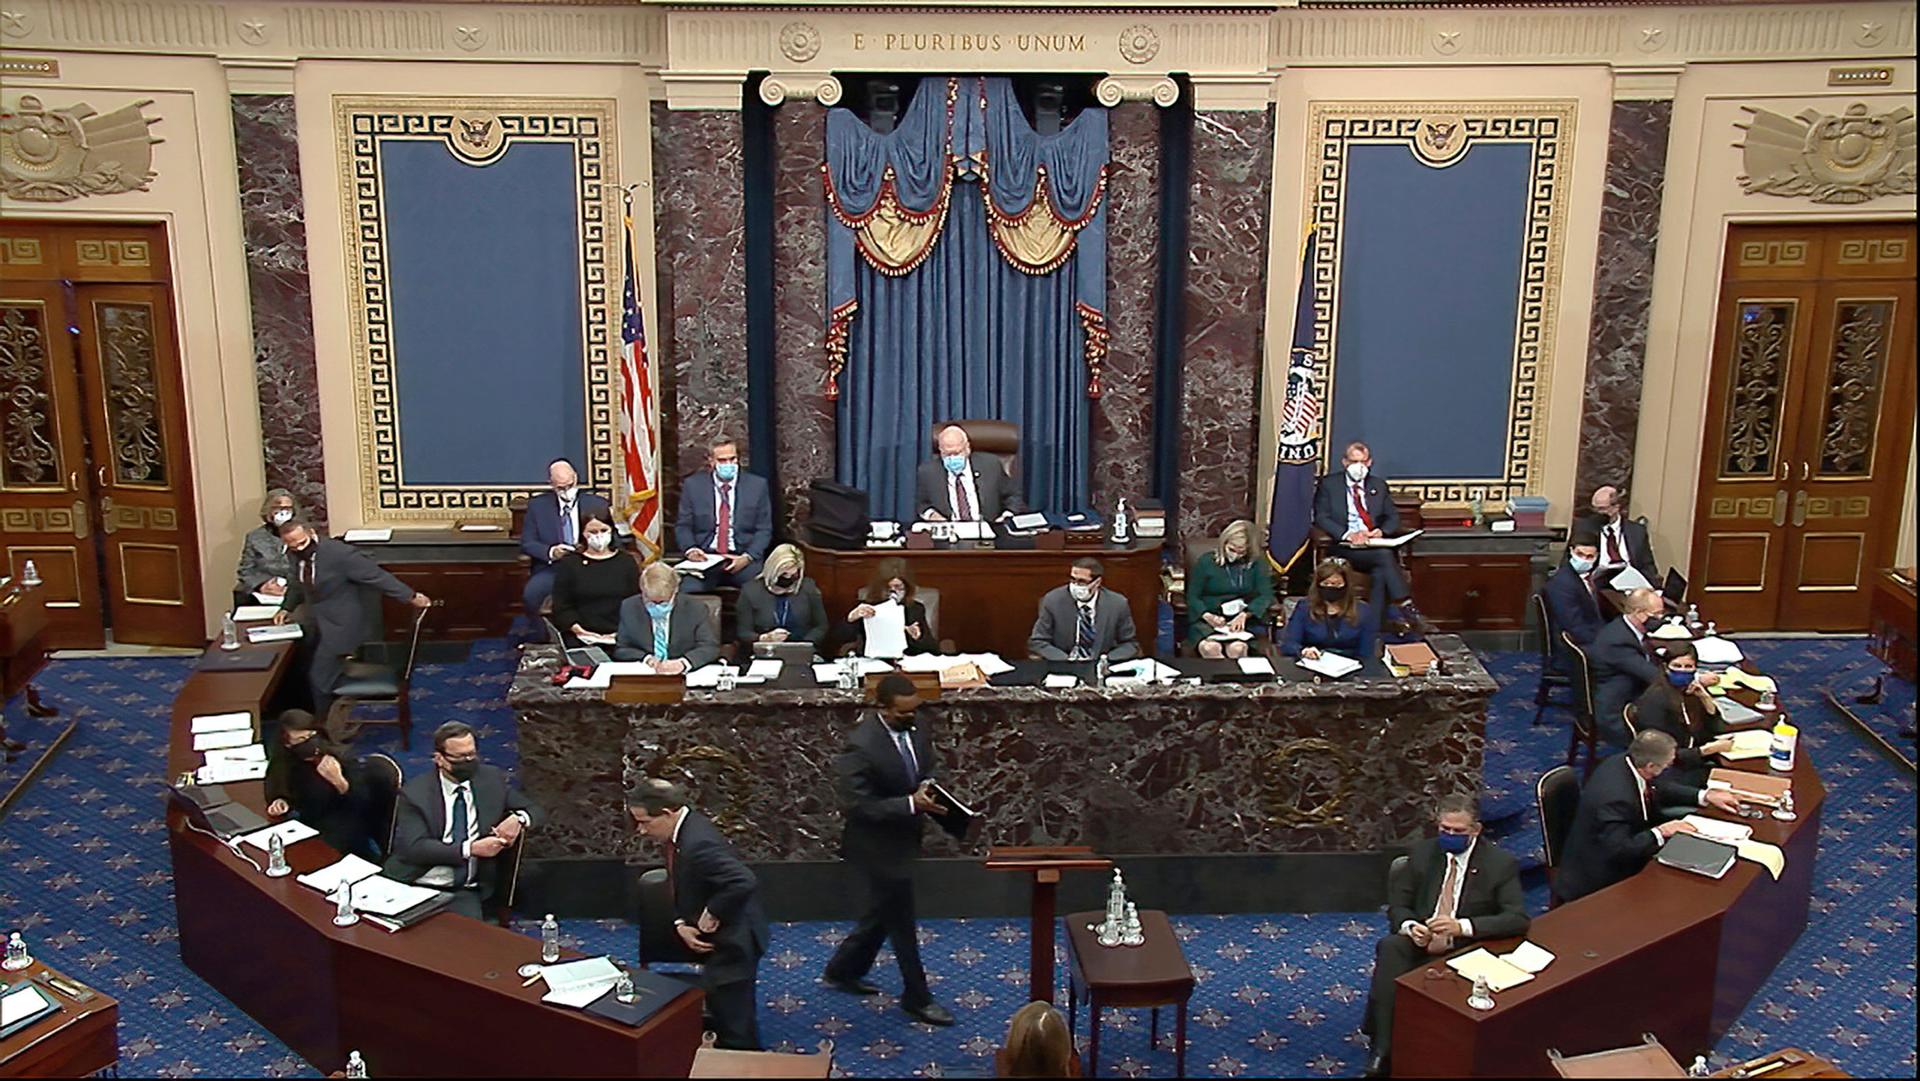 US lawmakers are shown gathering in the Senate with rounded wooden desks encircling a marble dais.